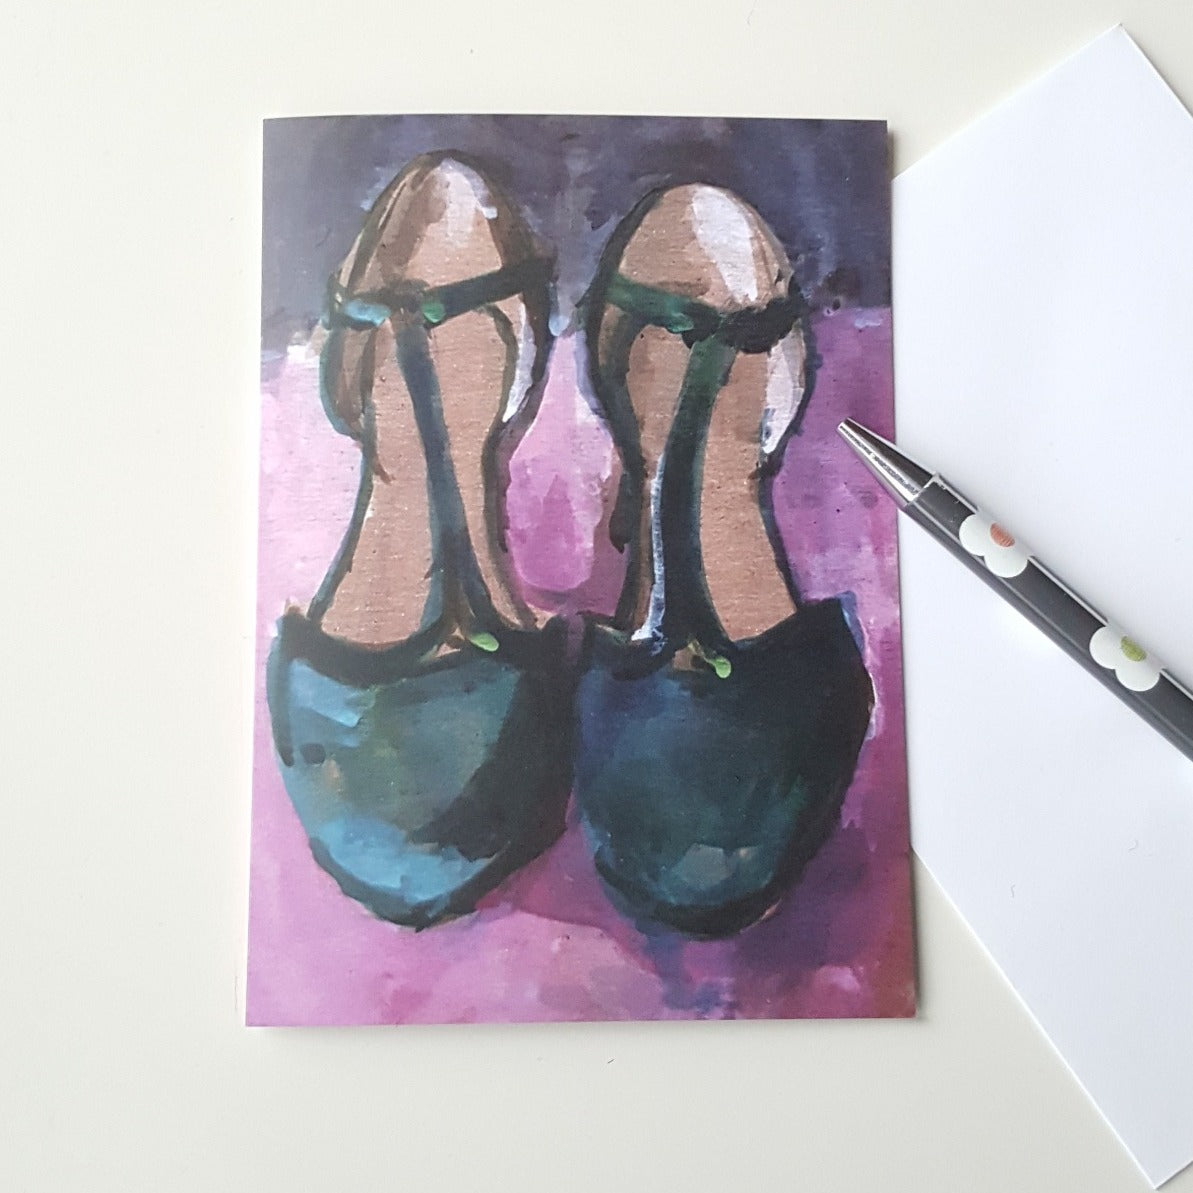 shoes greeting card on white desk with pen and evelope.